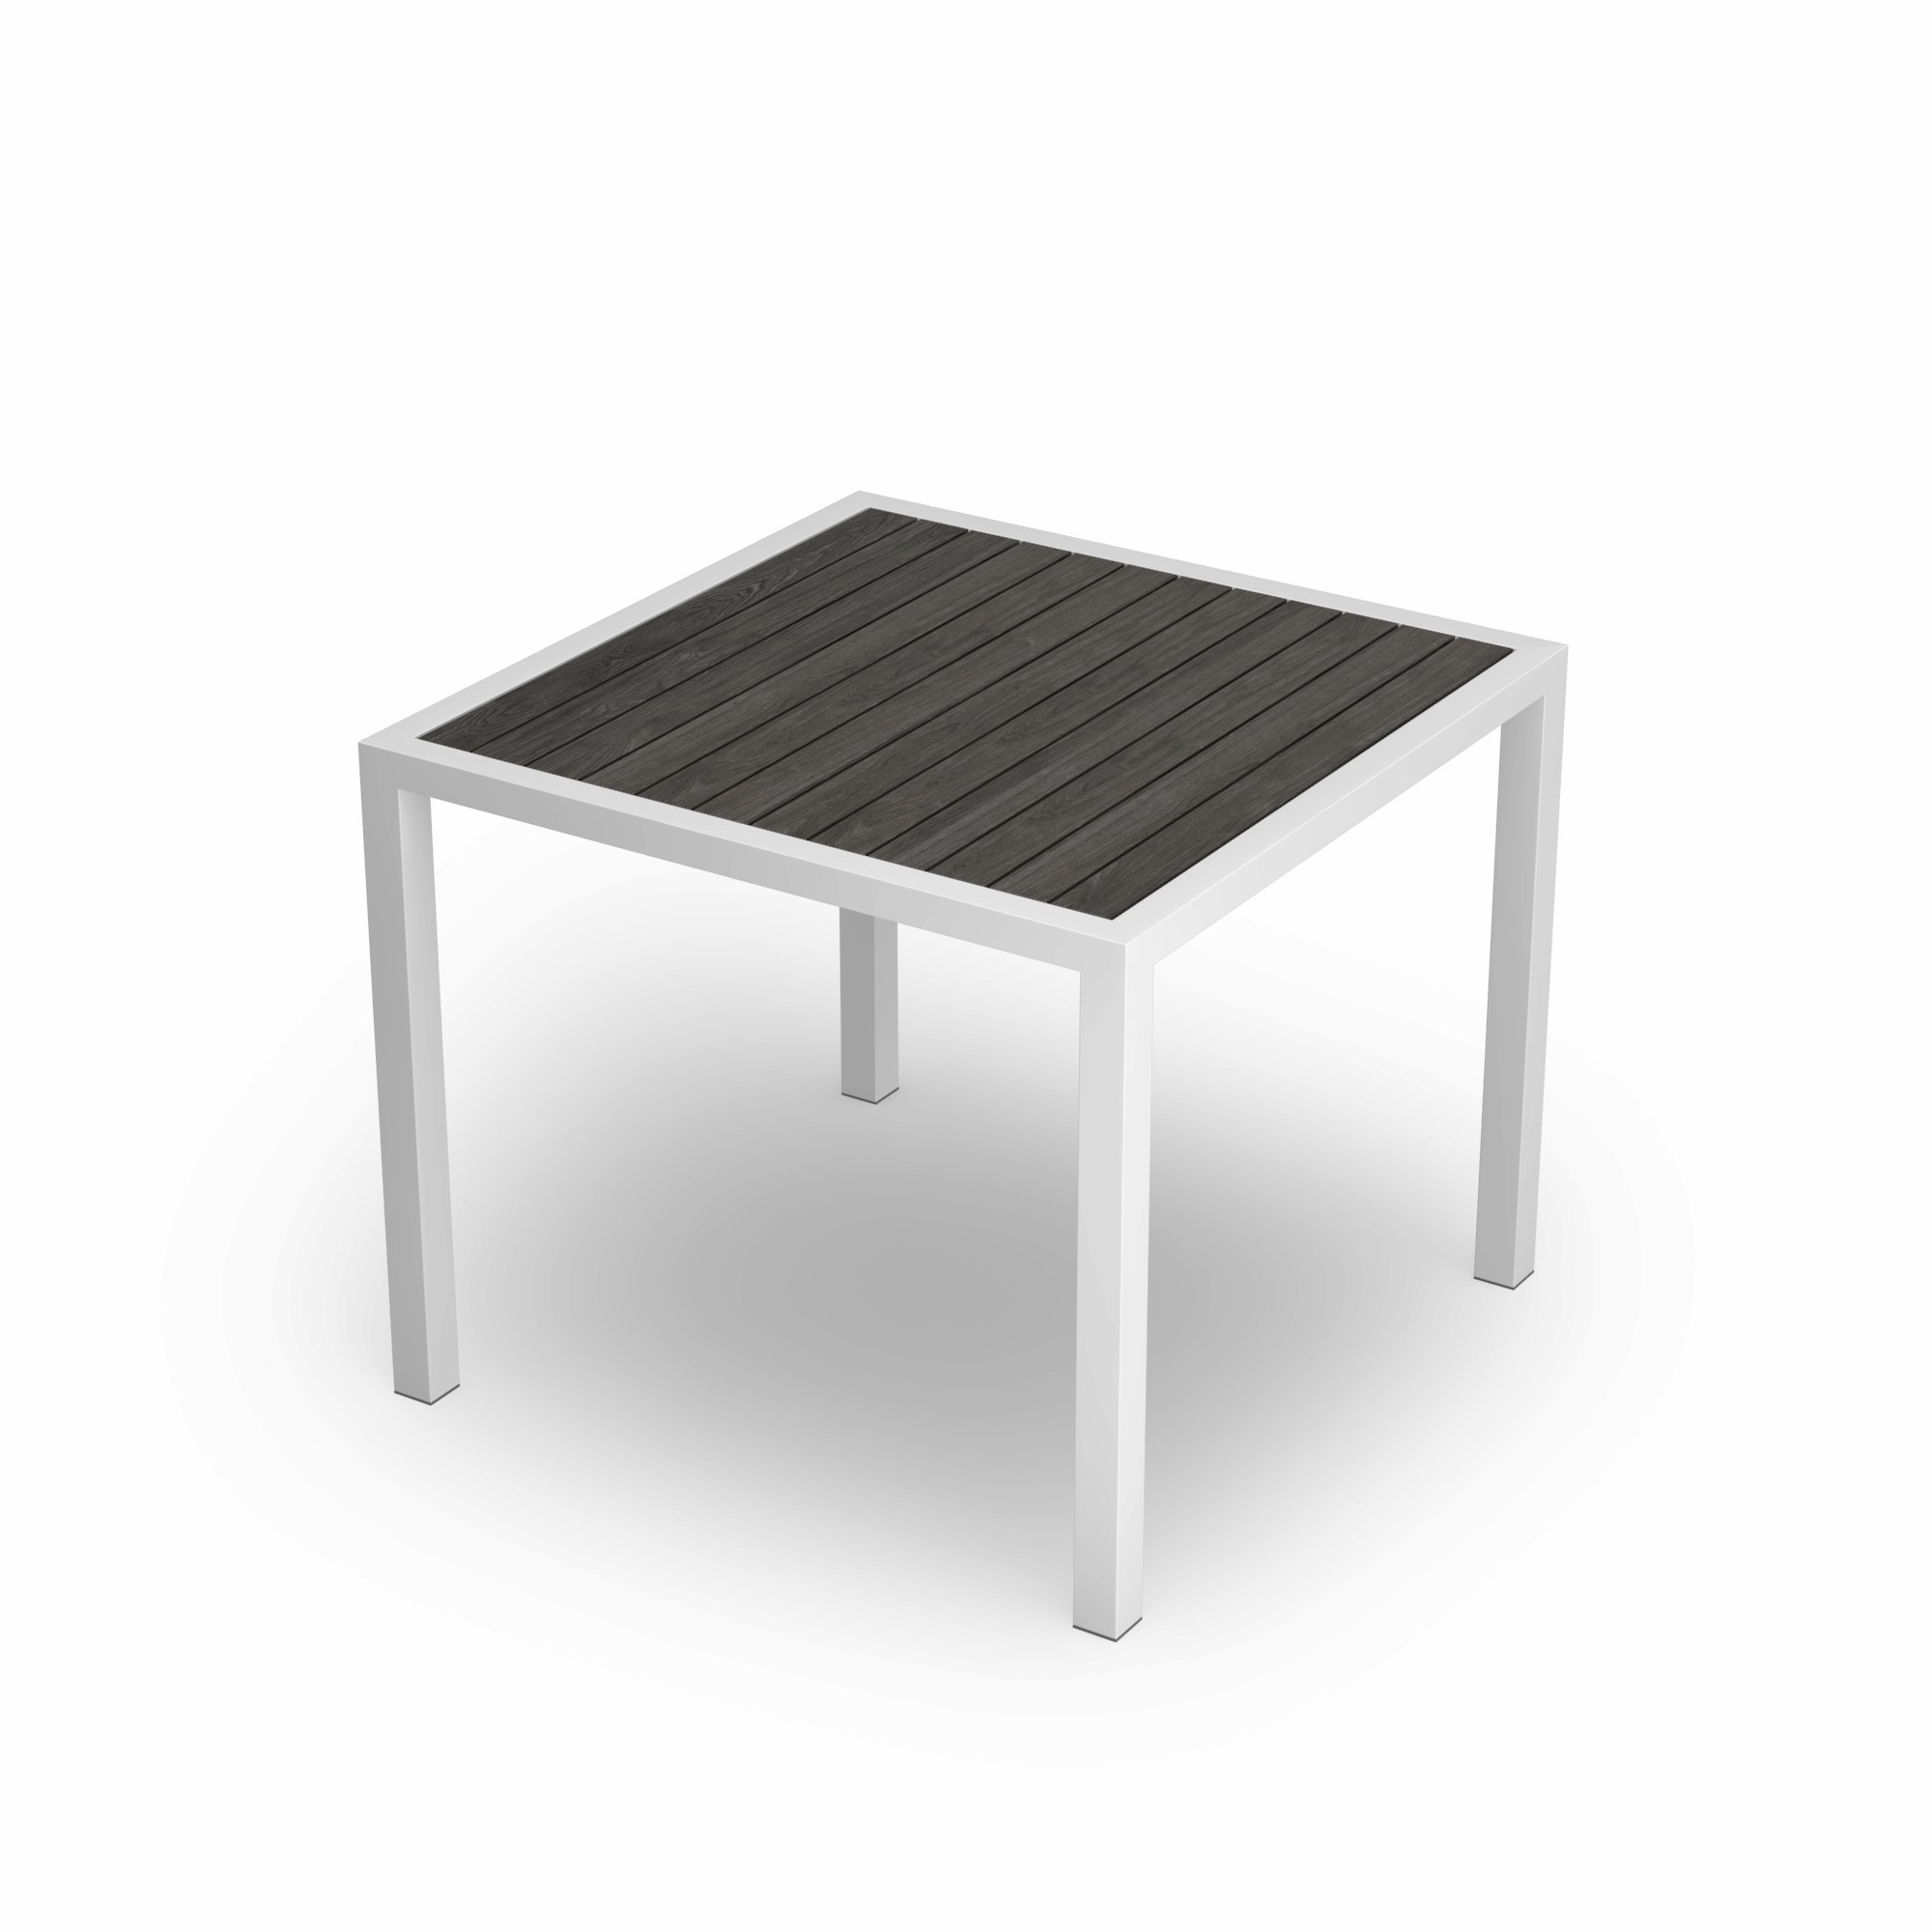 Outdoor Hospitality Emma Dining Table, Textured White frame with grey timber slats